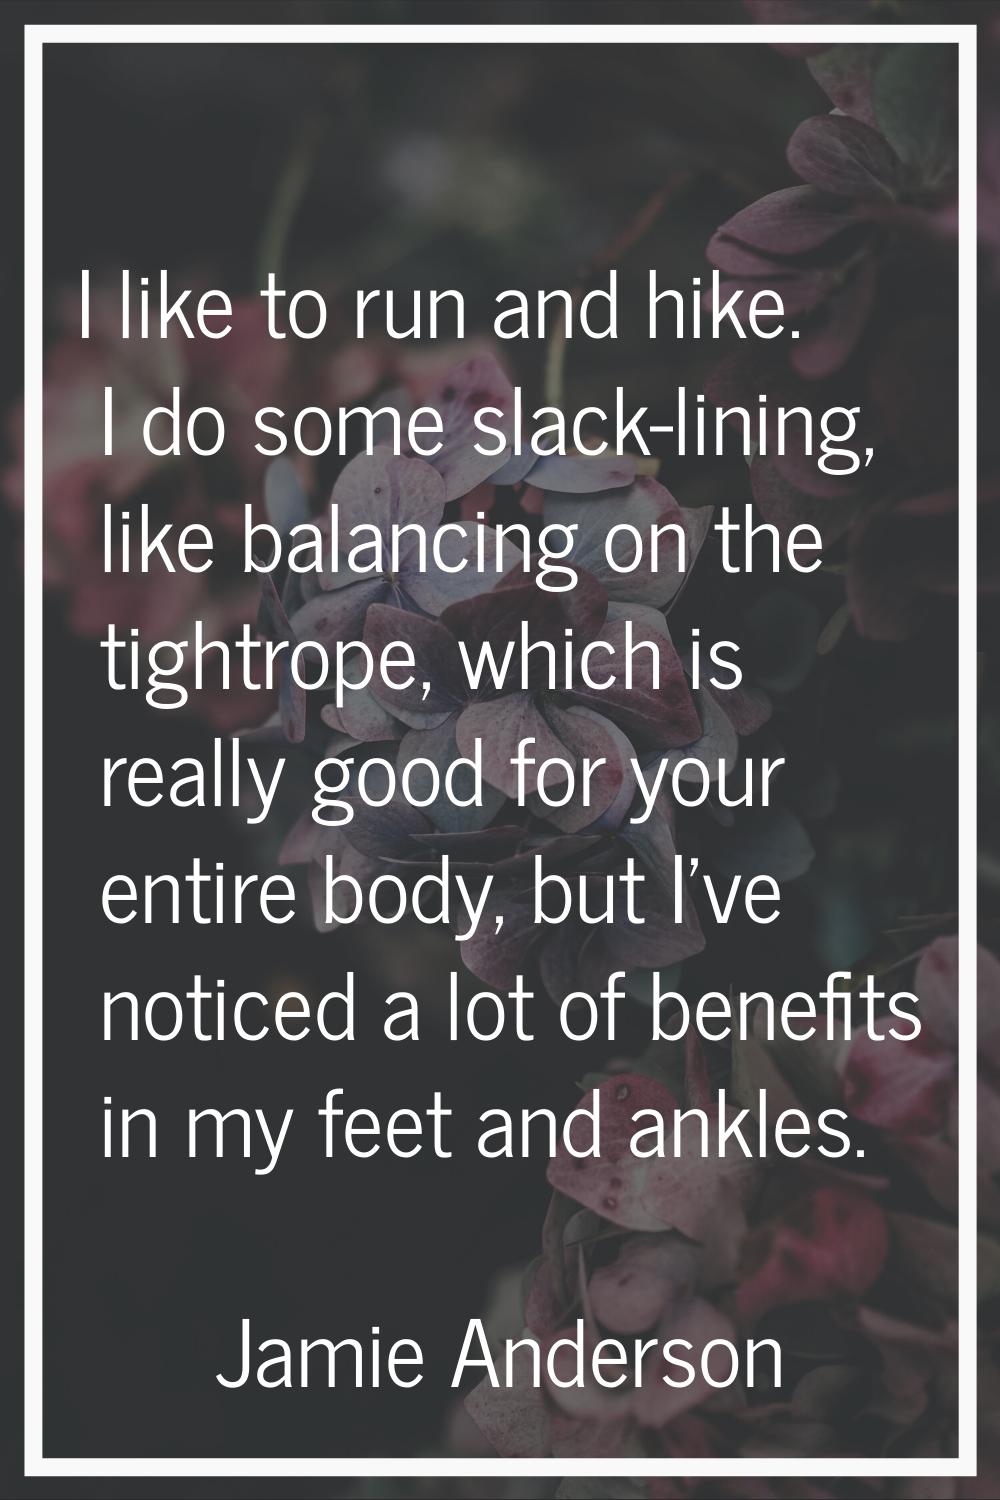 I like to run and hike. I do some slack-lining, like balancing on the tightrope, which is really go